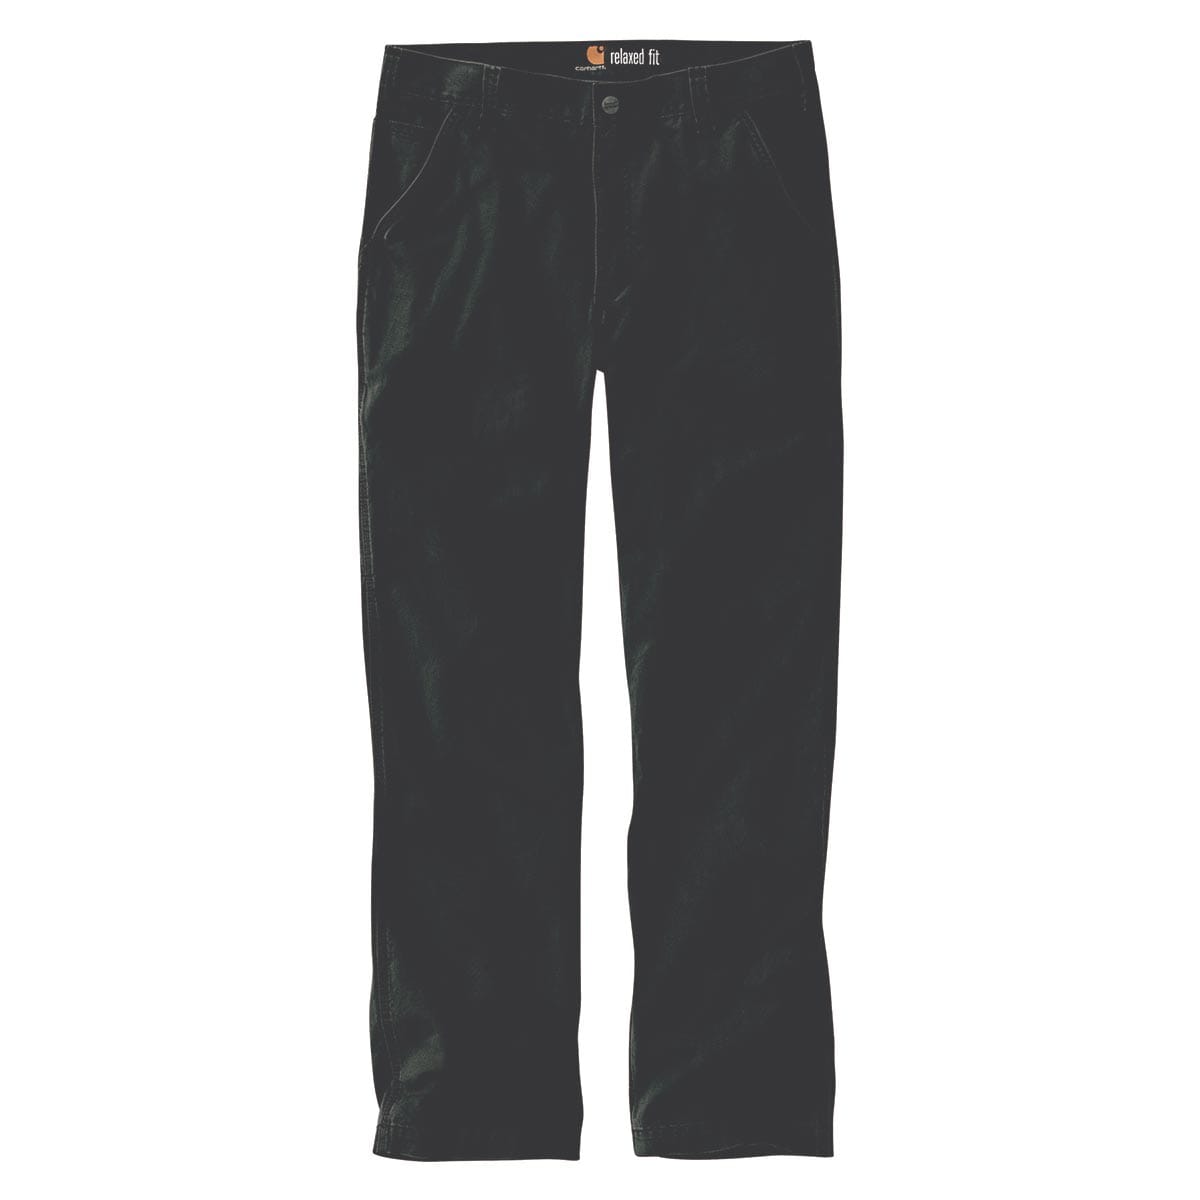 Carhartt Rugged Flex Relaxed Fit Canvas Work Pant